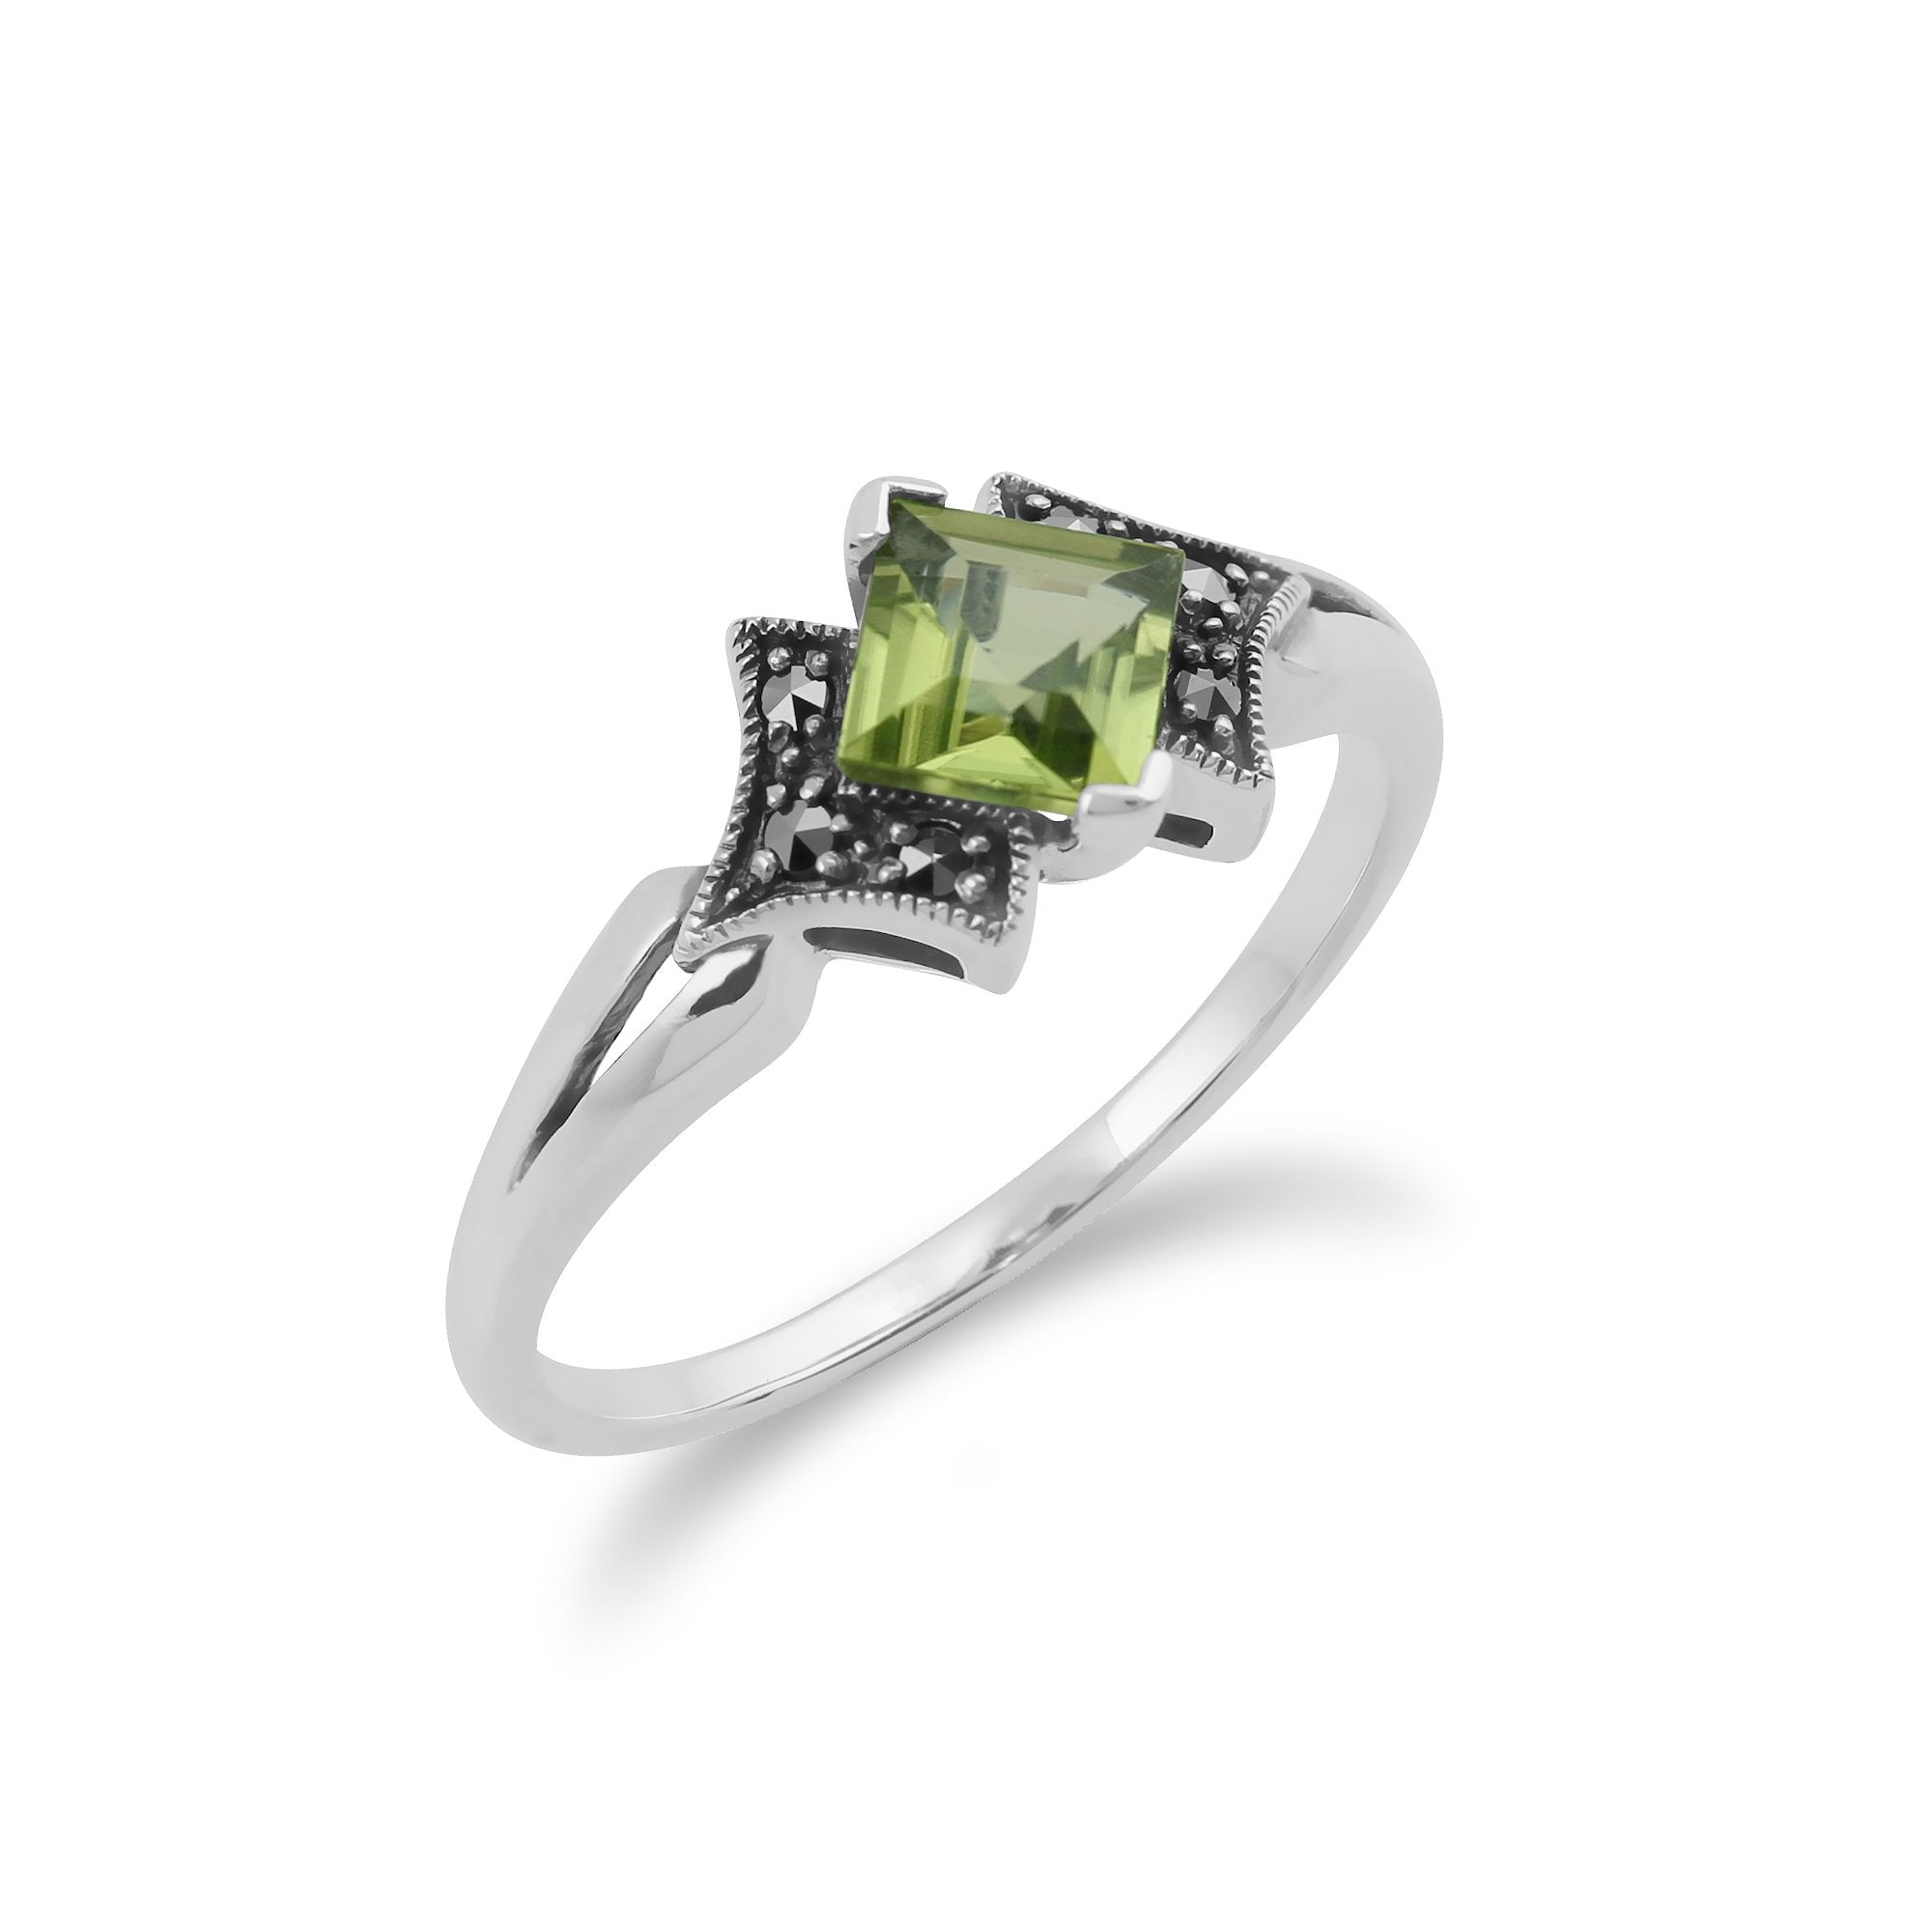 Art Deco Style Square Peridot & Marcasite Ring in 925 Sterling Silver